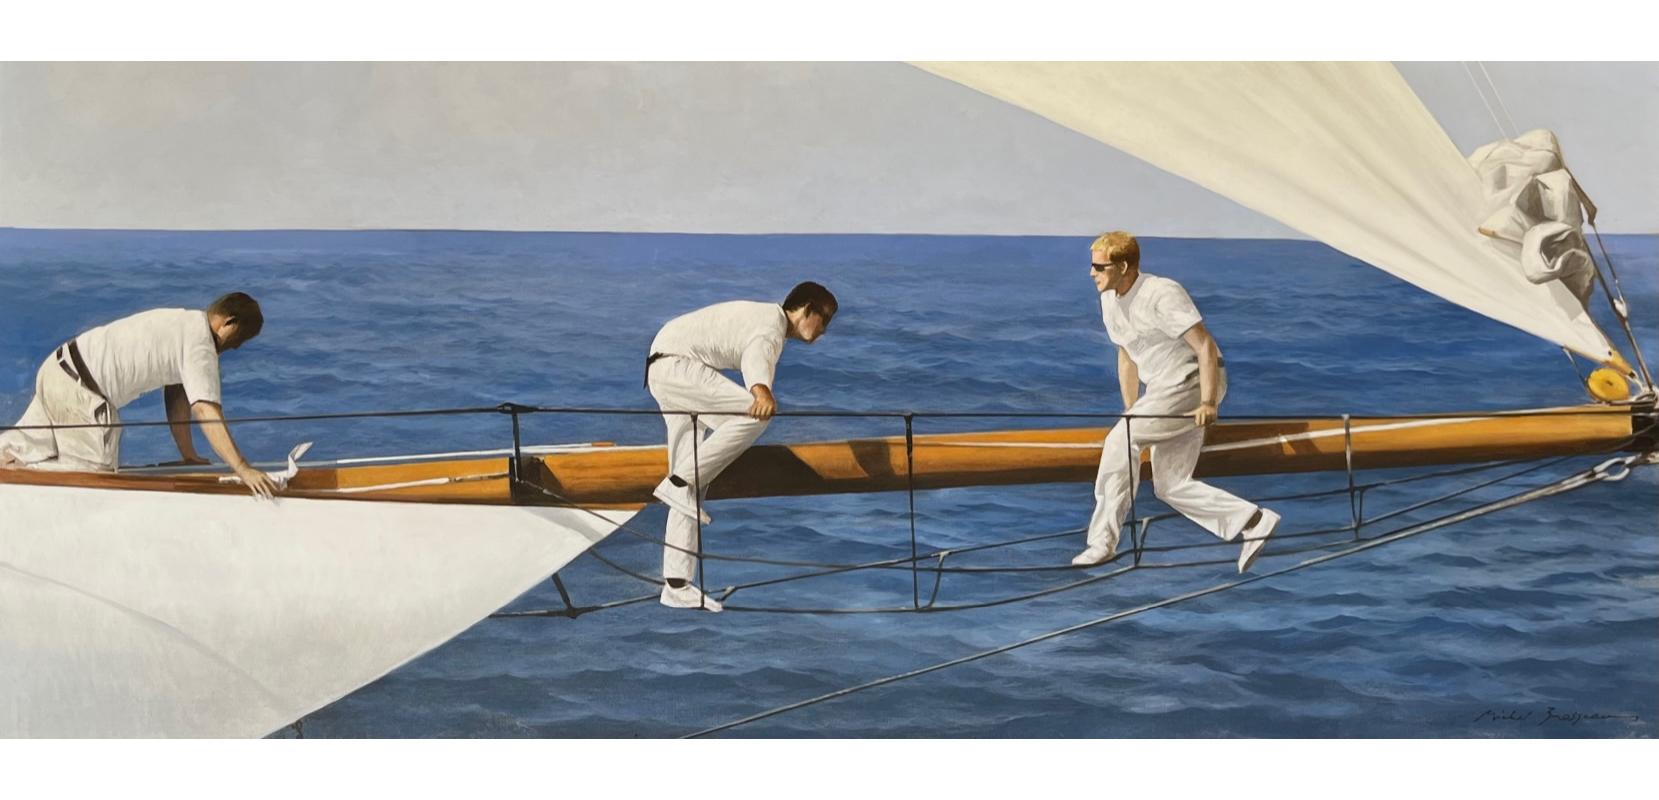 Michel Brosseau Figurative Painting - "The Crew" oil painting of three sailors on the boom of a sailboat on the ocean 